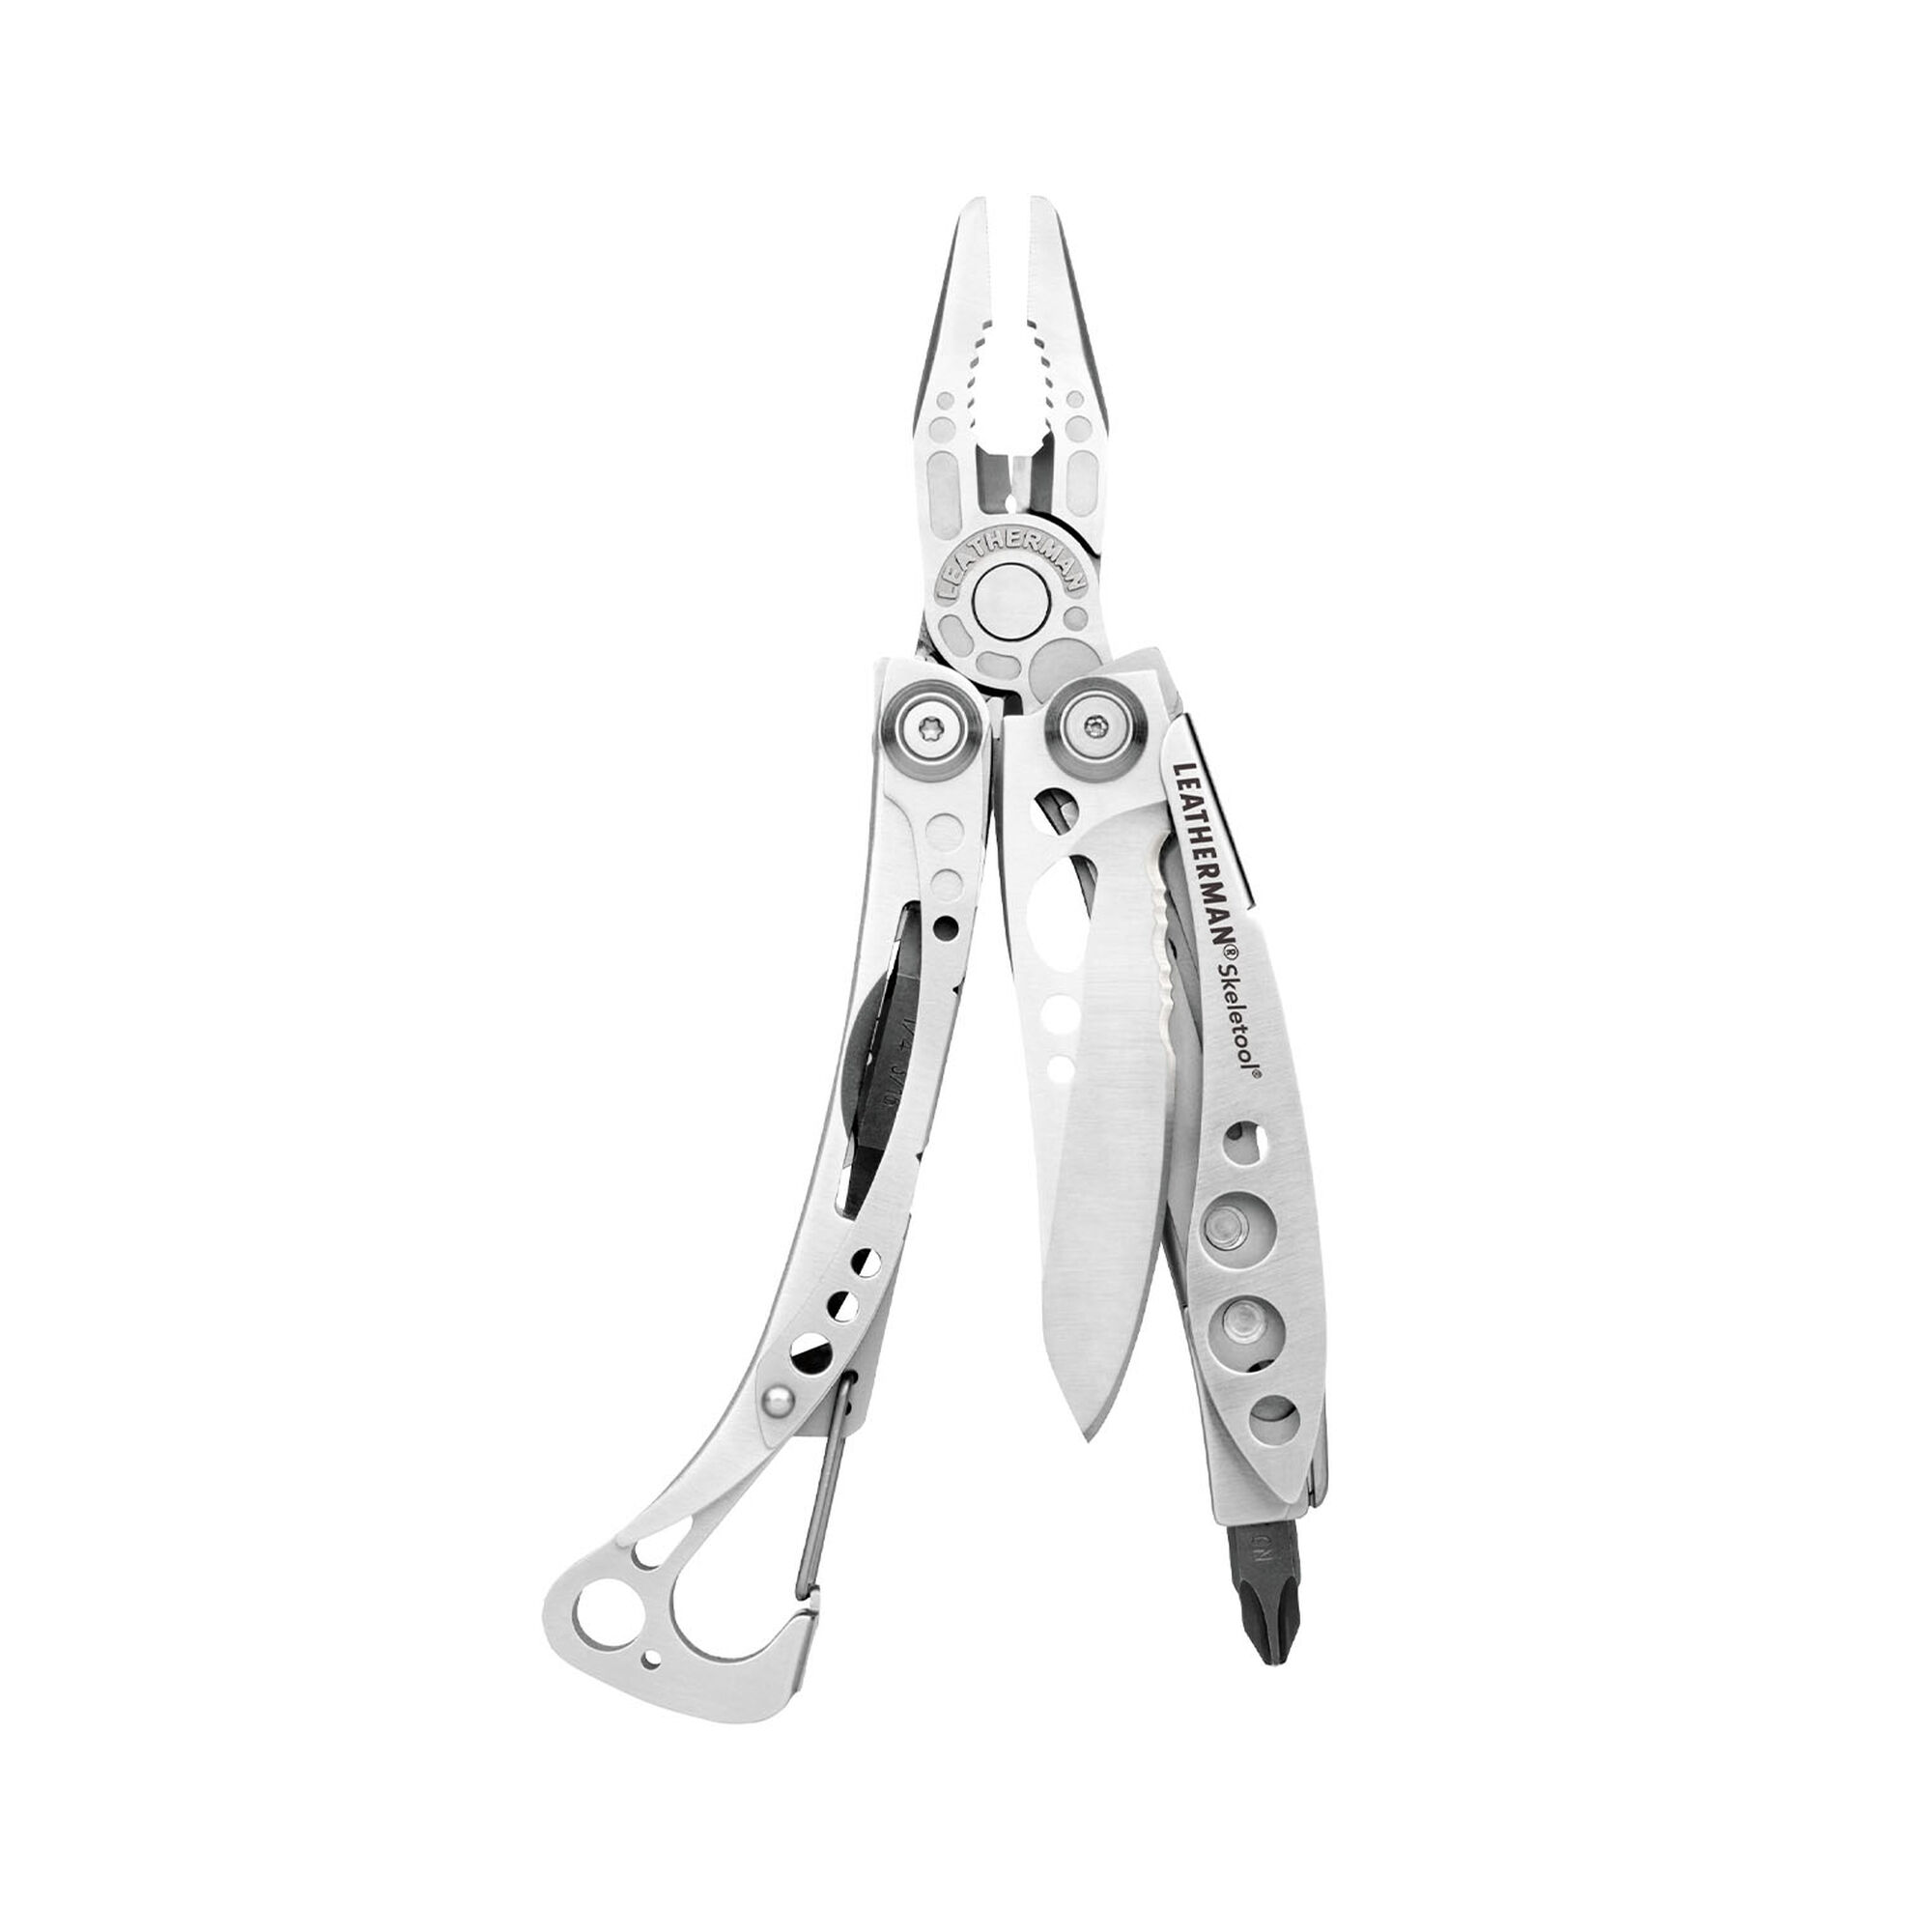 LEATHERMAN, Signal, 19-in-1 Multi-tool for Outdoors, Camping, Hiking,  Fishing, Survival, Durable & Lightweight EDC, Made in the USA,  Topographical